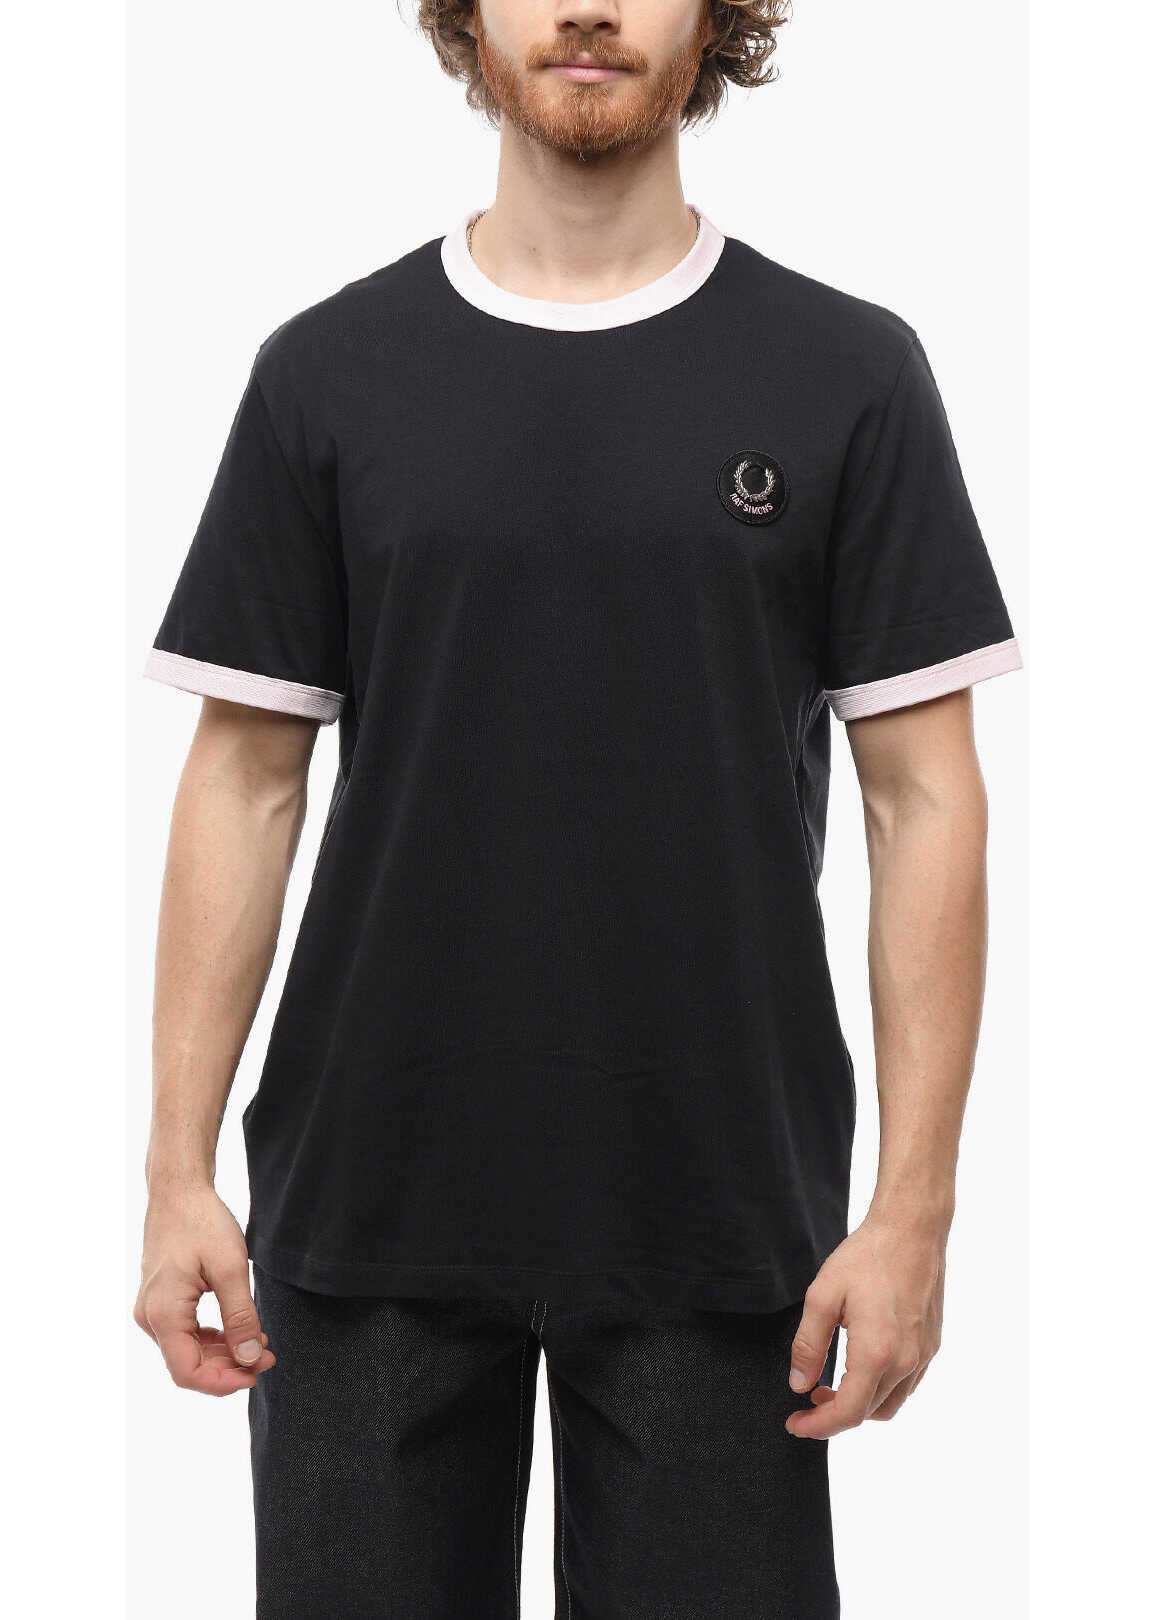 Raf Simons Fred Perry X Rs Crew Neck T-Shirt With Contrasting Edges Black